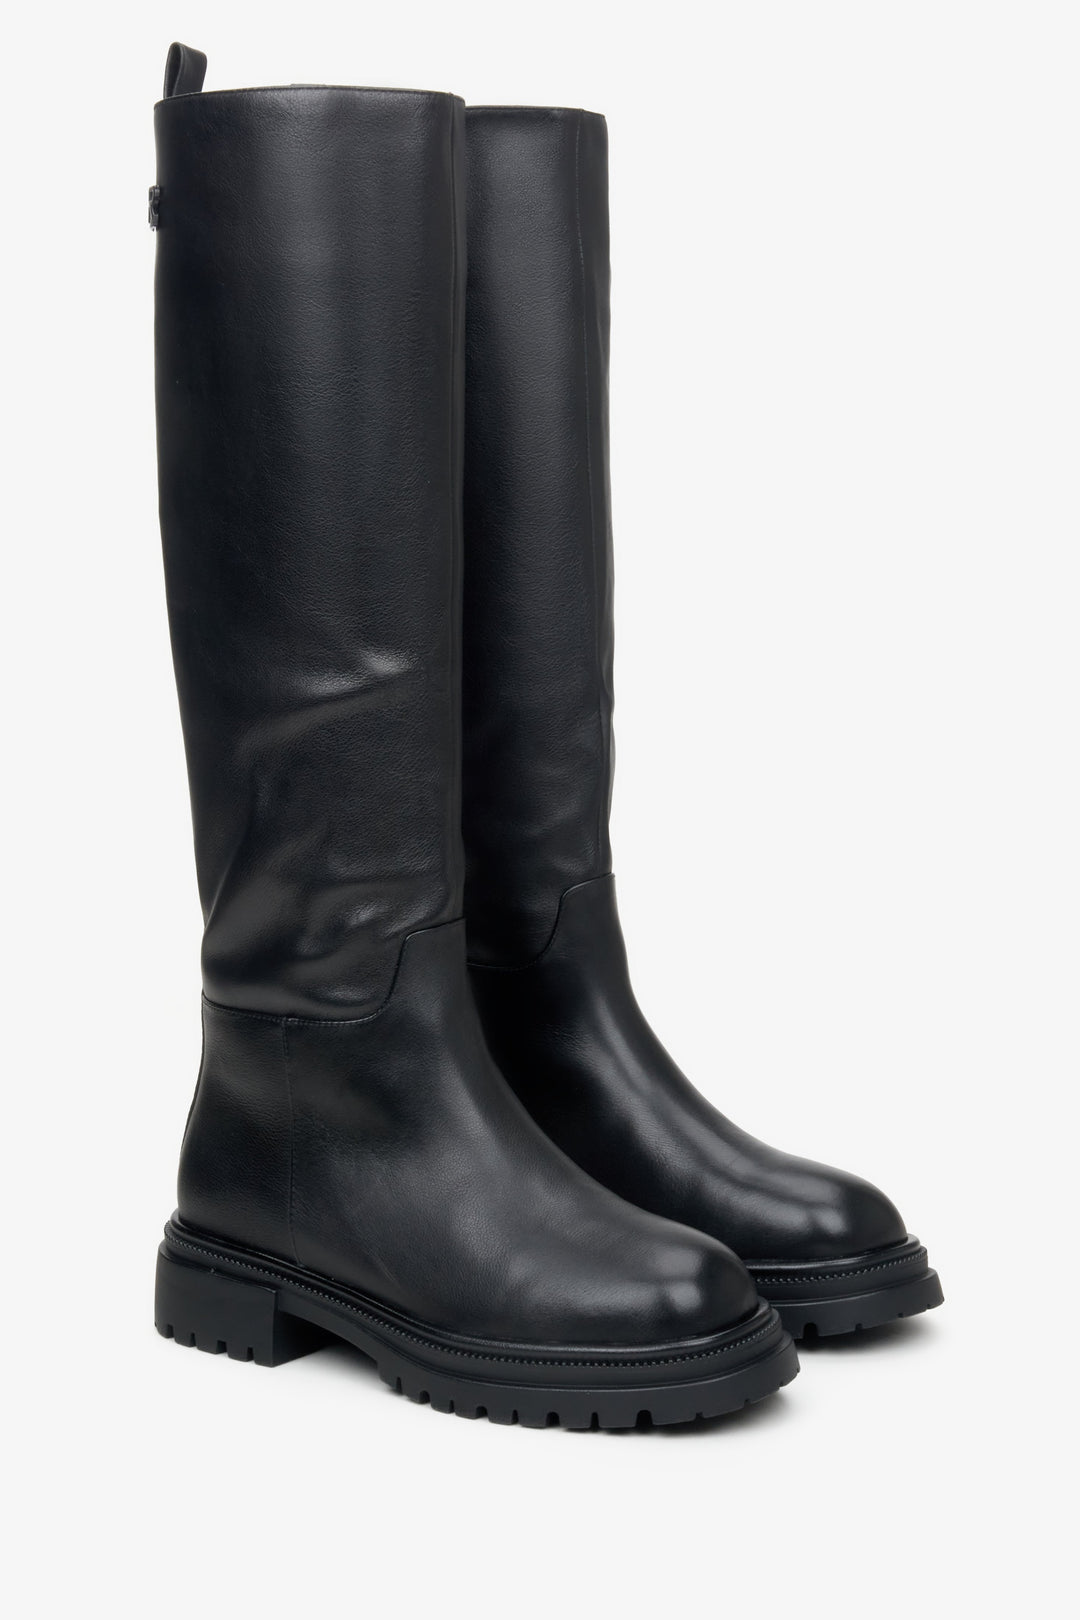 Women's high black leather boots by Estro.